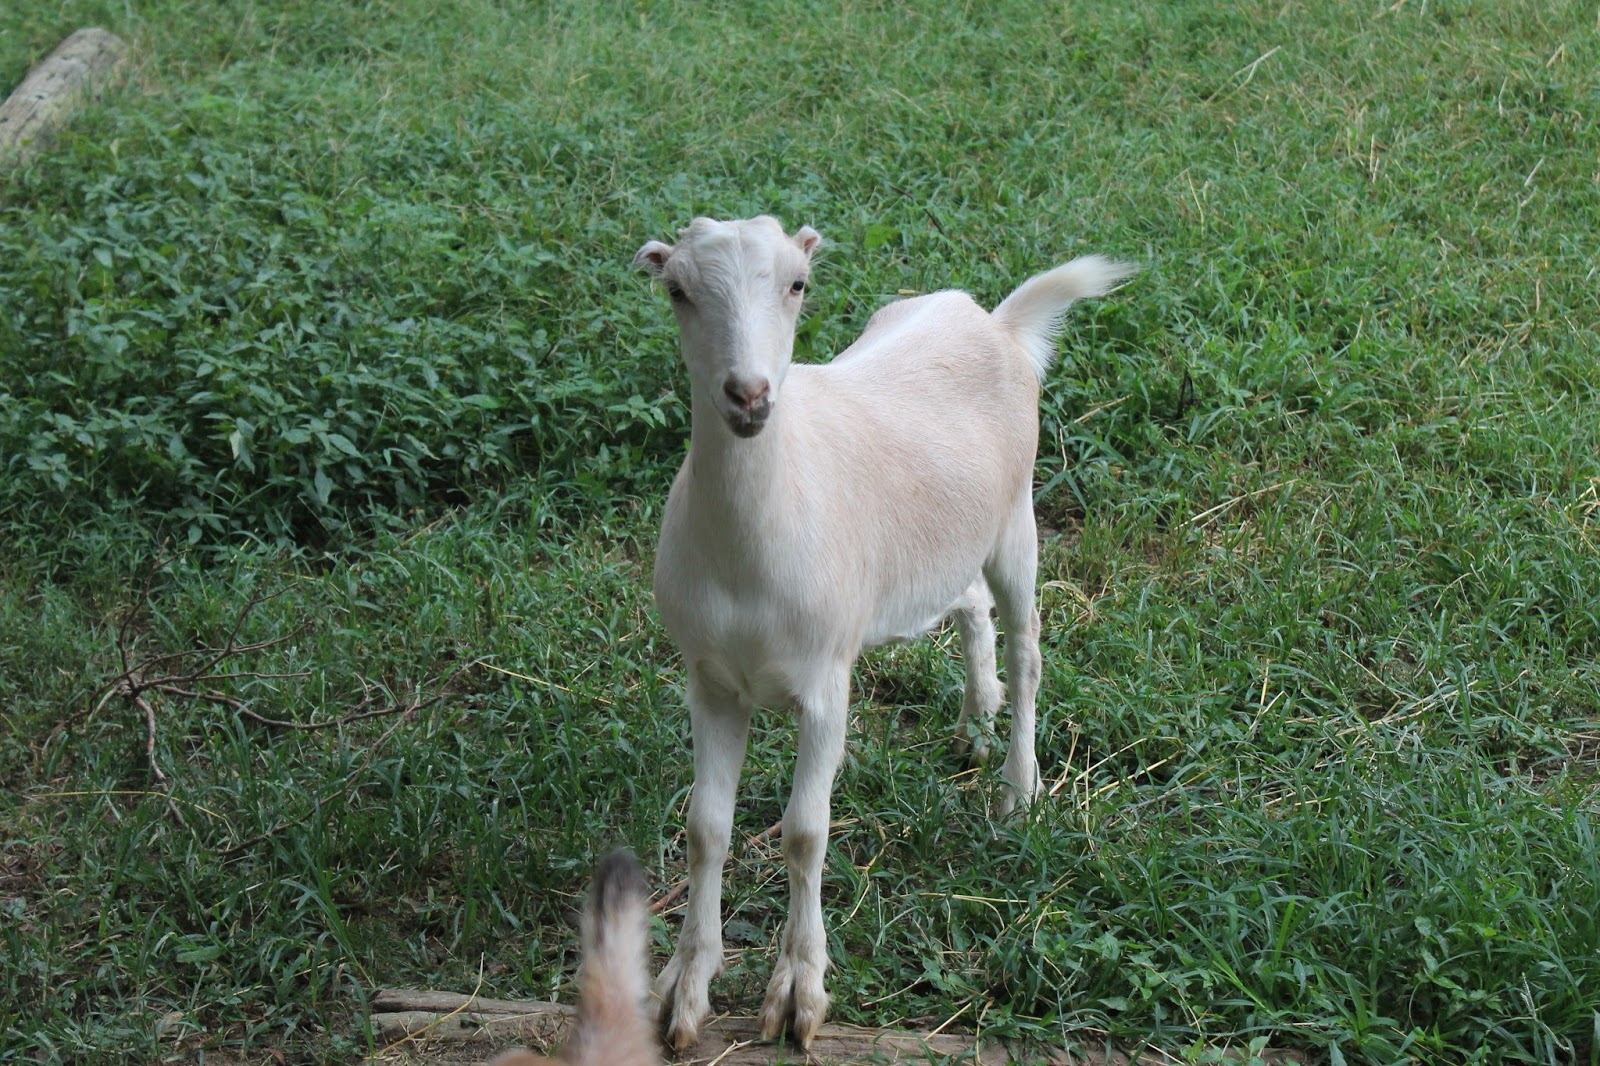 Outback Farm: Goats are mean.